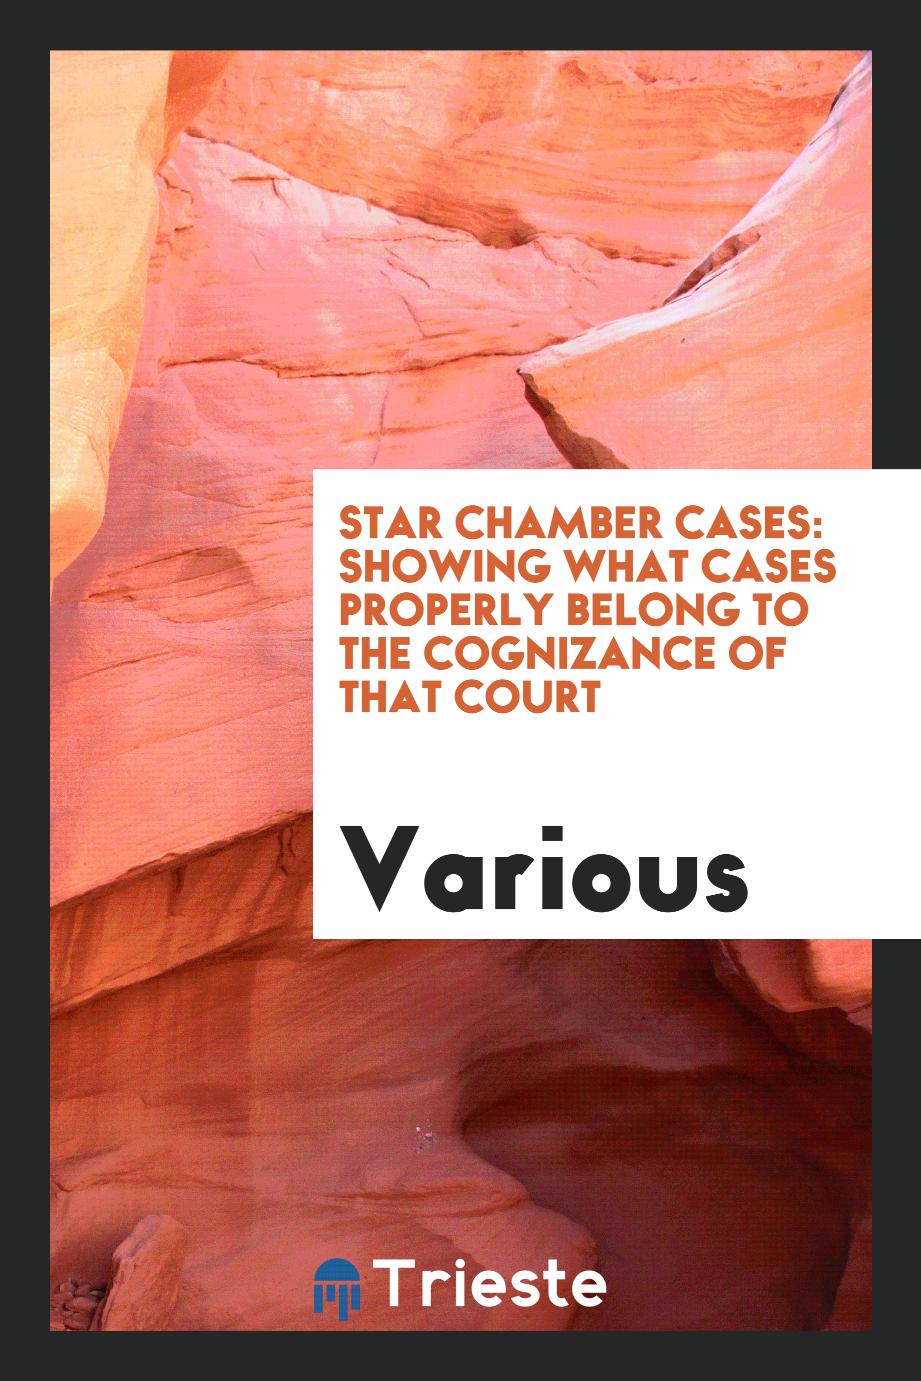 Star Chamber Cases: Showing what Cases Properly Belong to the Cognizance of that Court